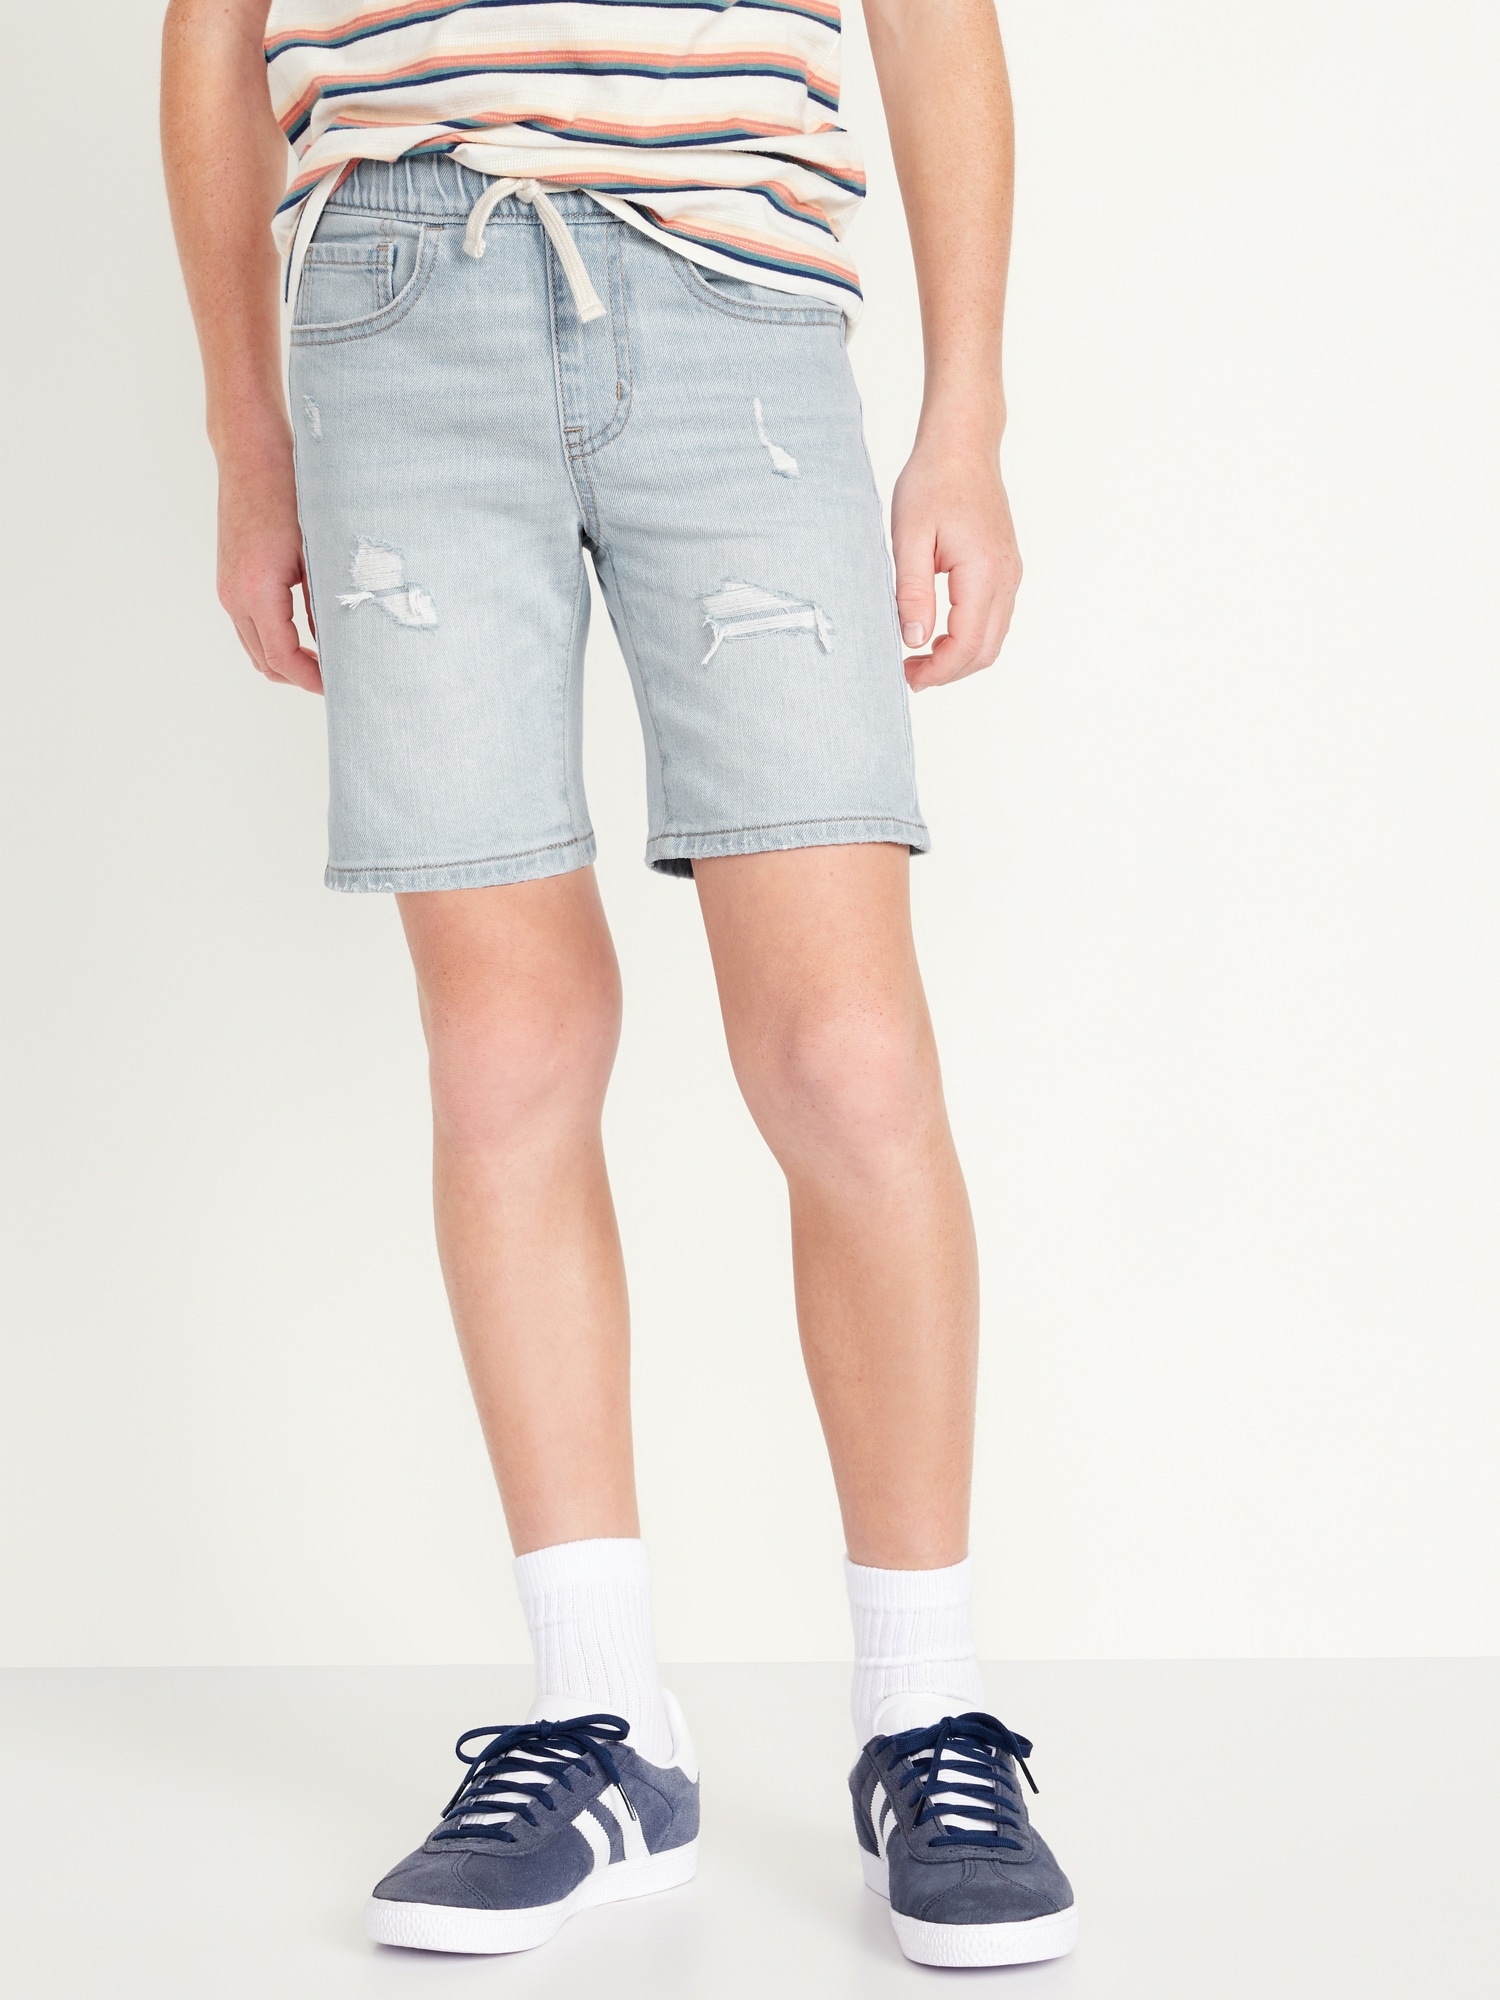 360 Stretch Pull-On Jean Shorts for Boys (At Knee